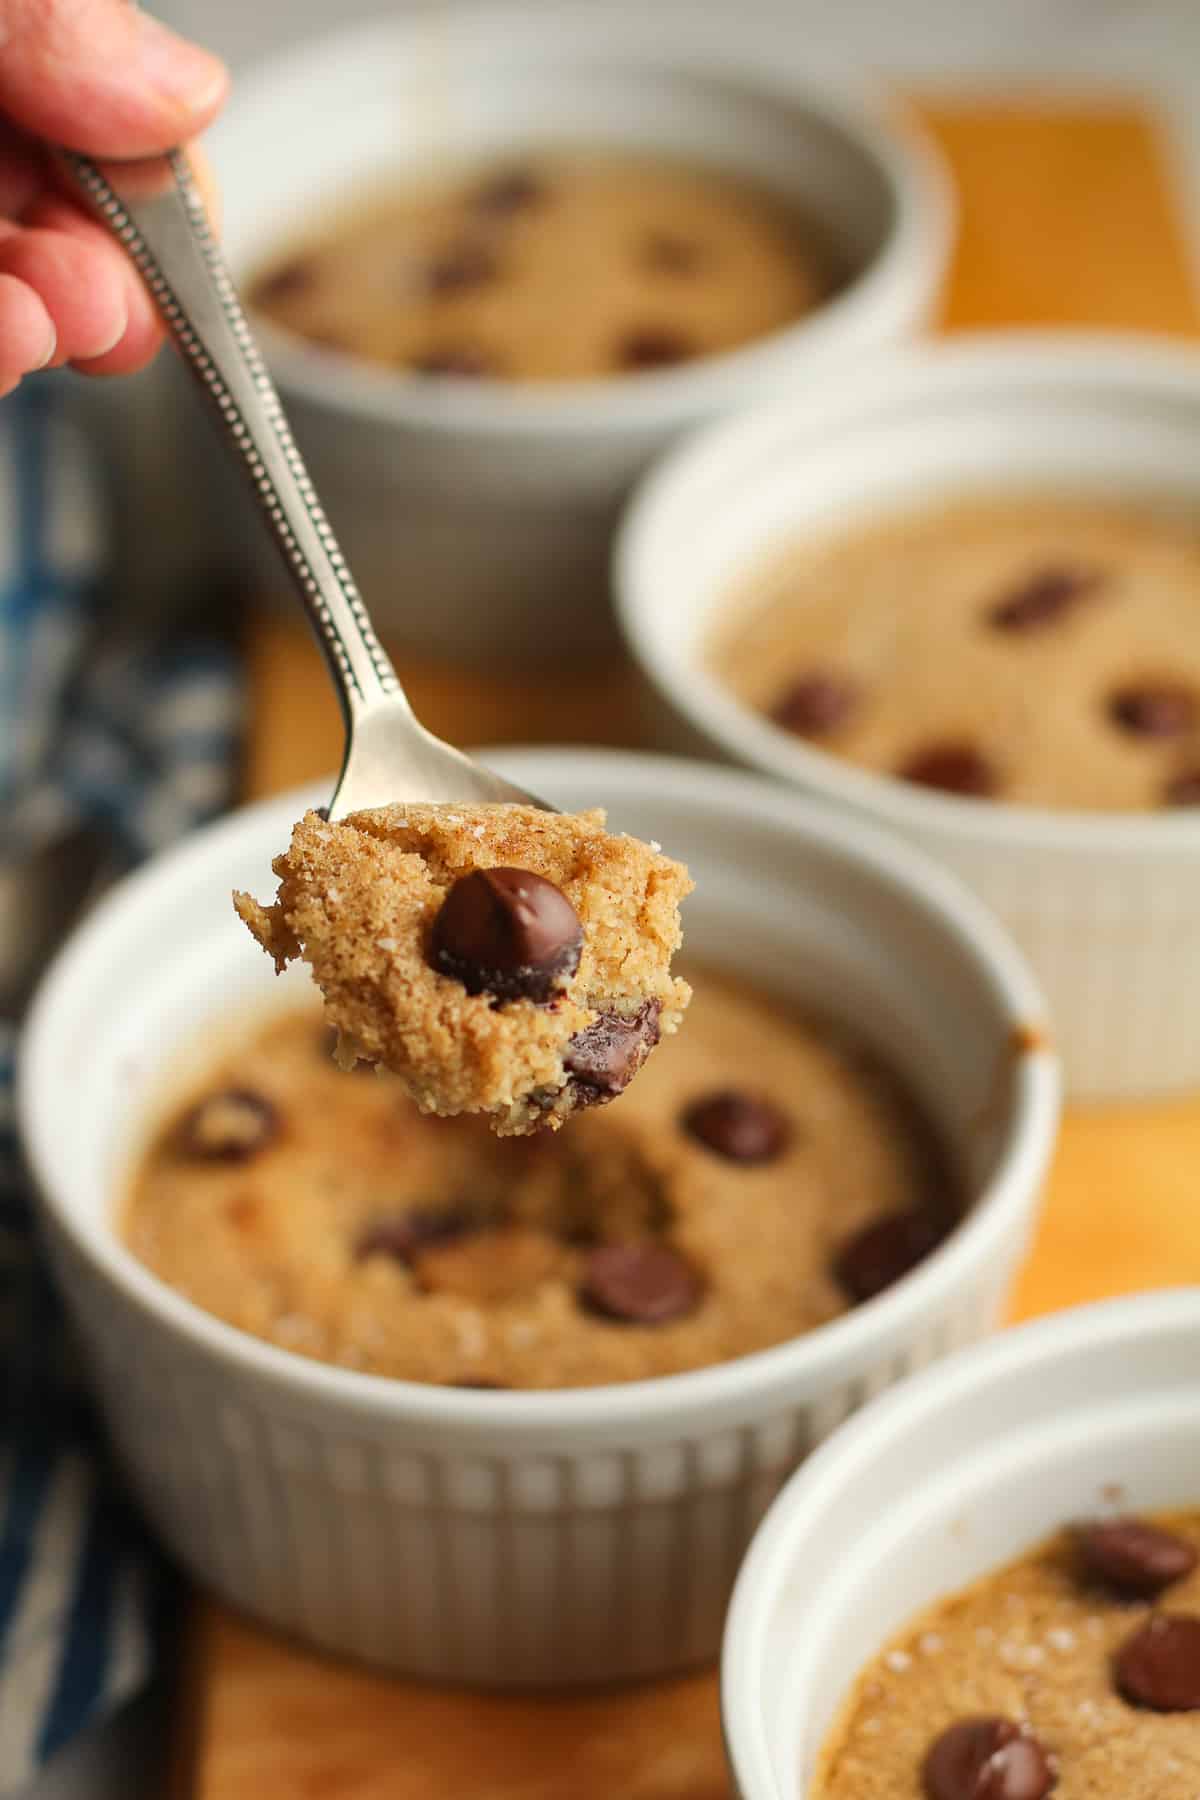 A spoonful of the baked oatmeal